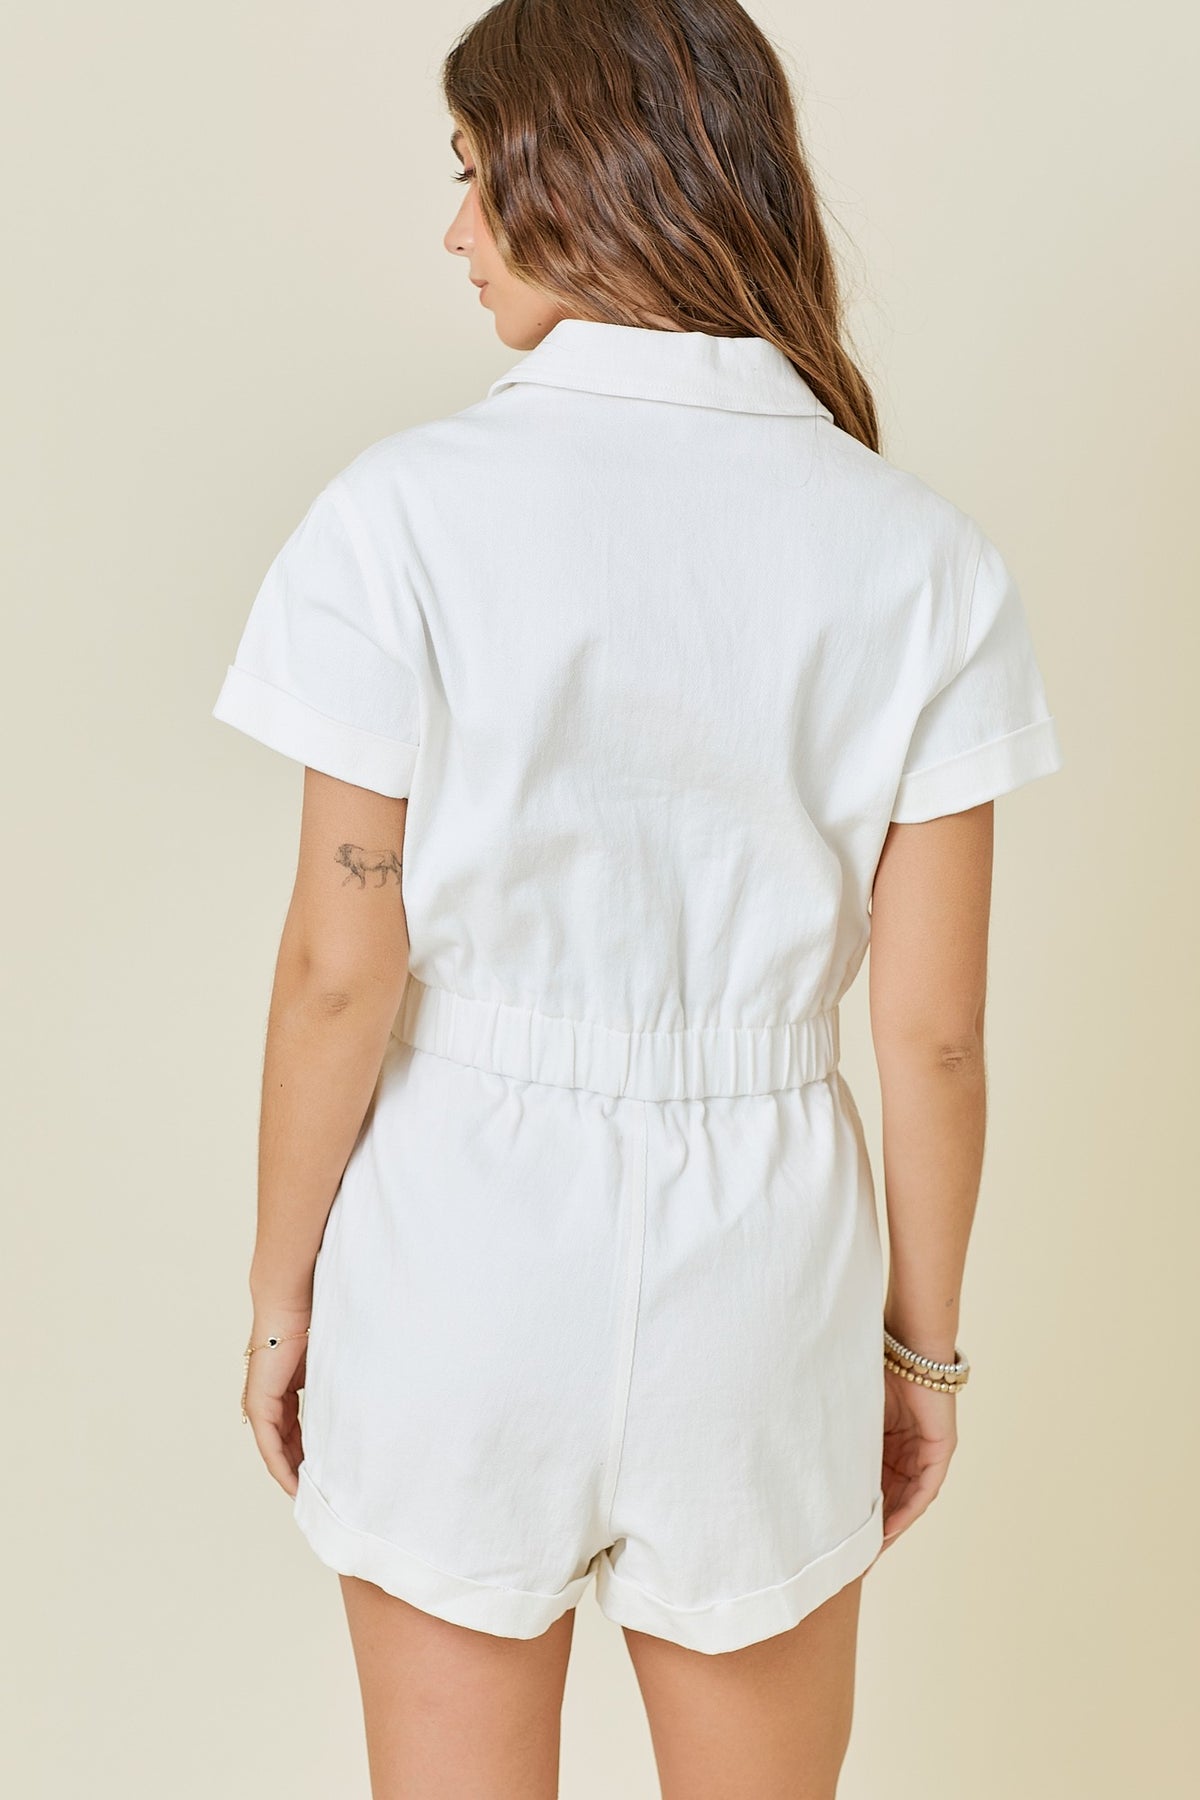 denim romper with elastic waistband in white-back view